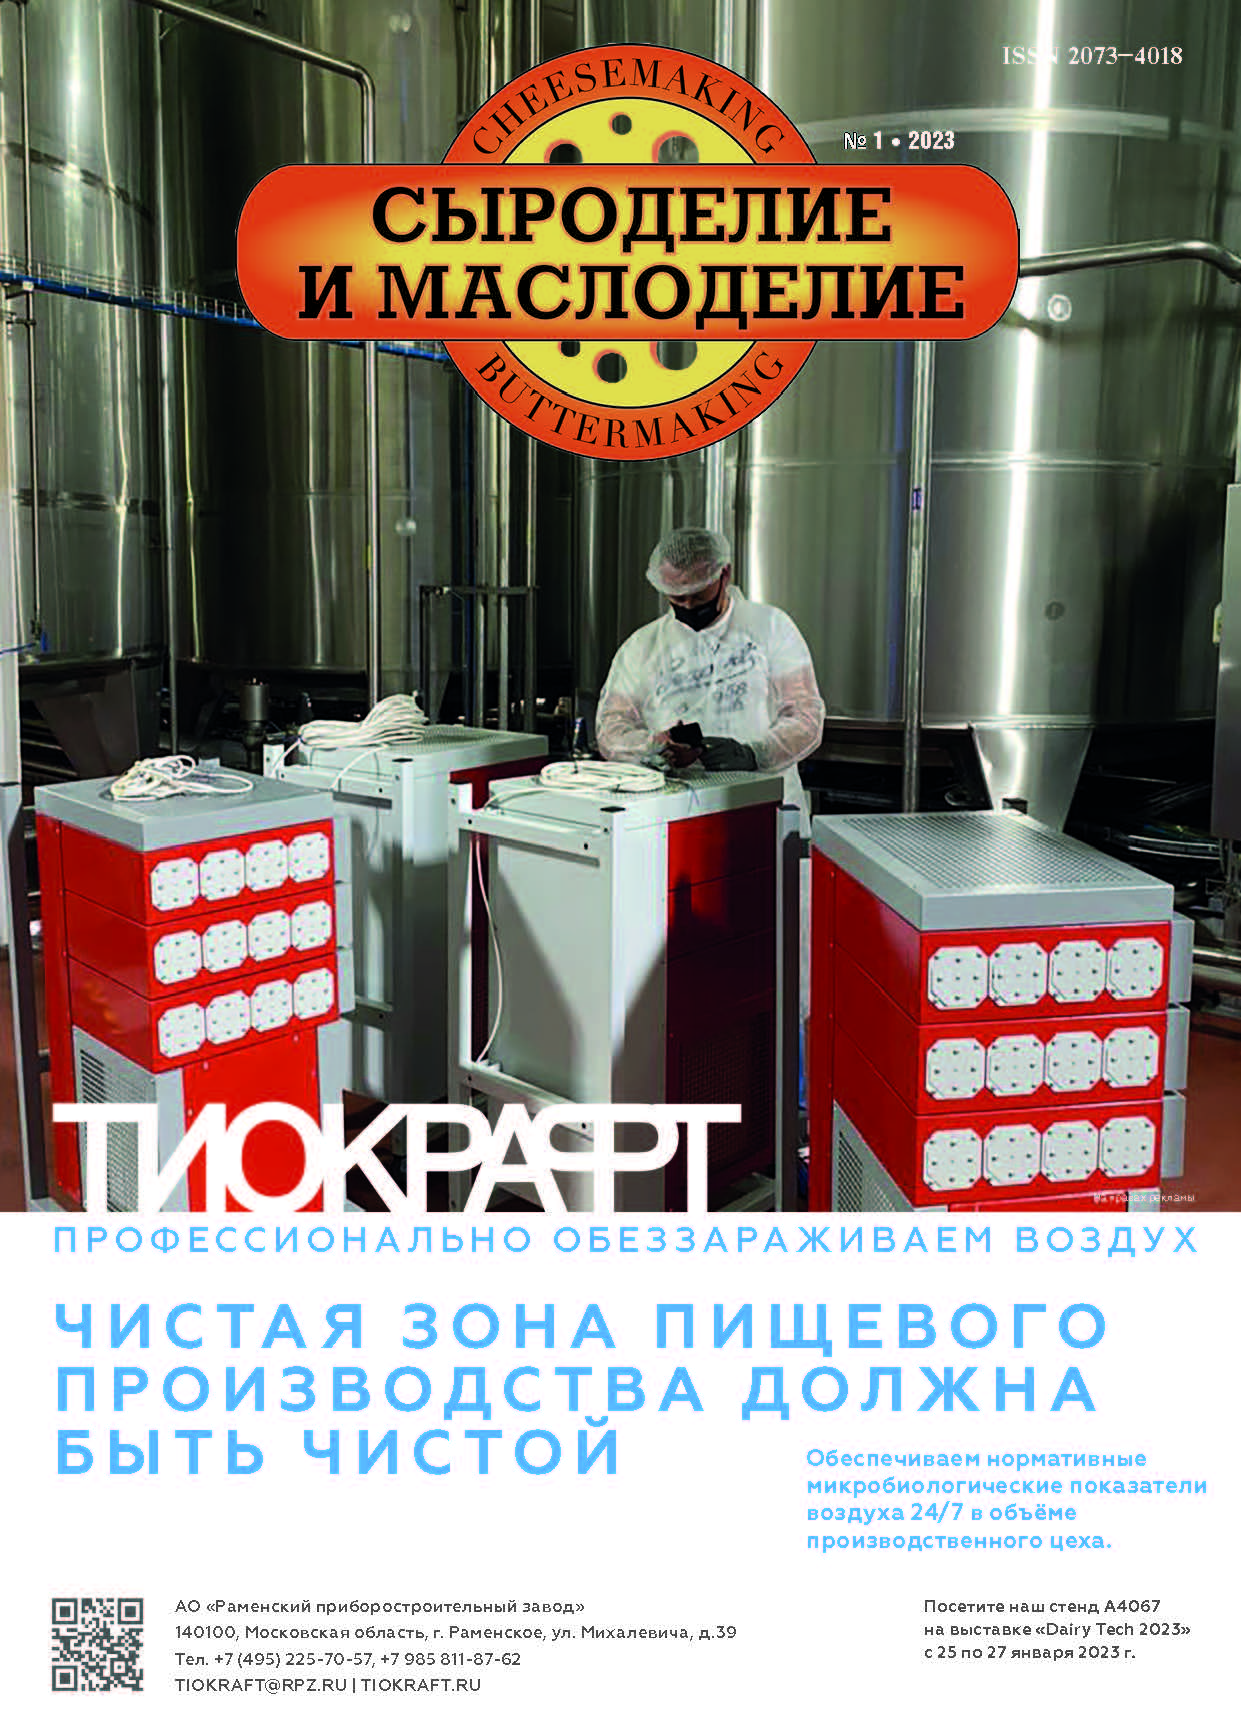                         Three tips from the company «THIOKRAFT» on combating yeast and mold spores in the air environment of food production
            